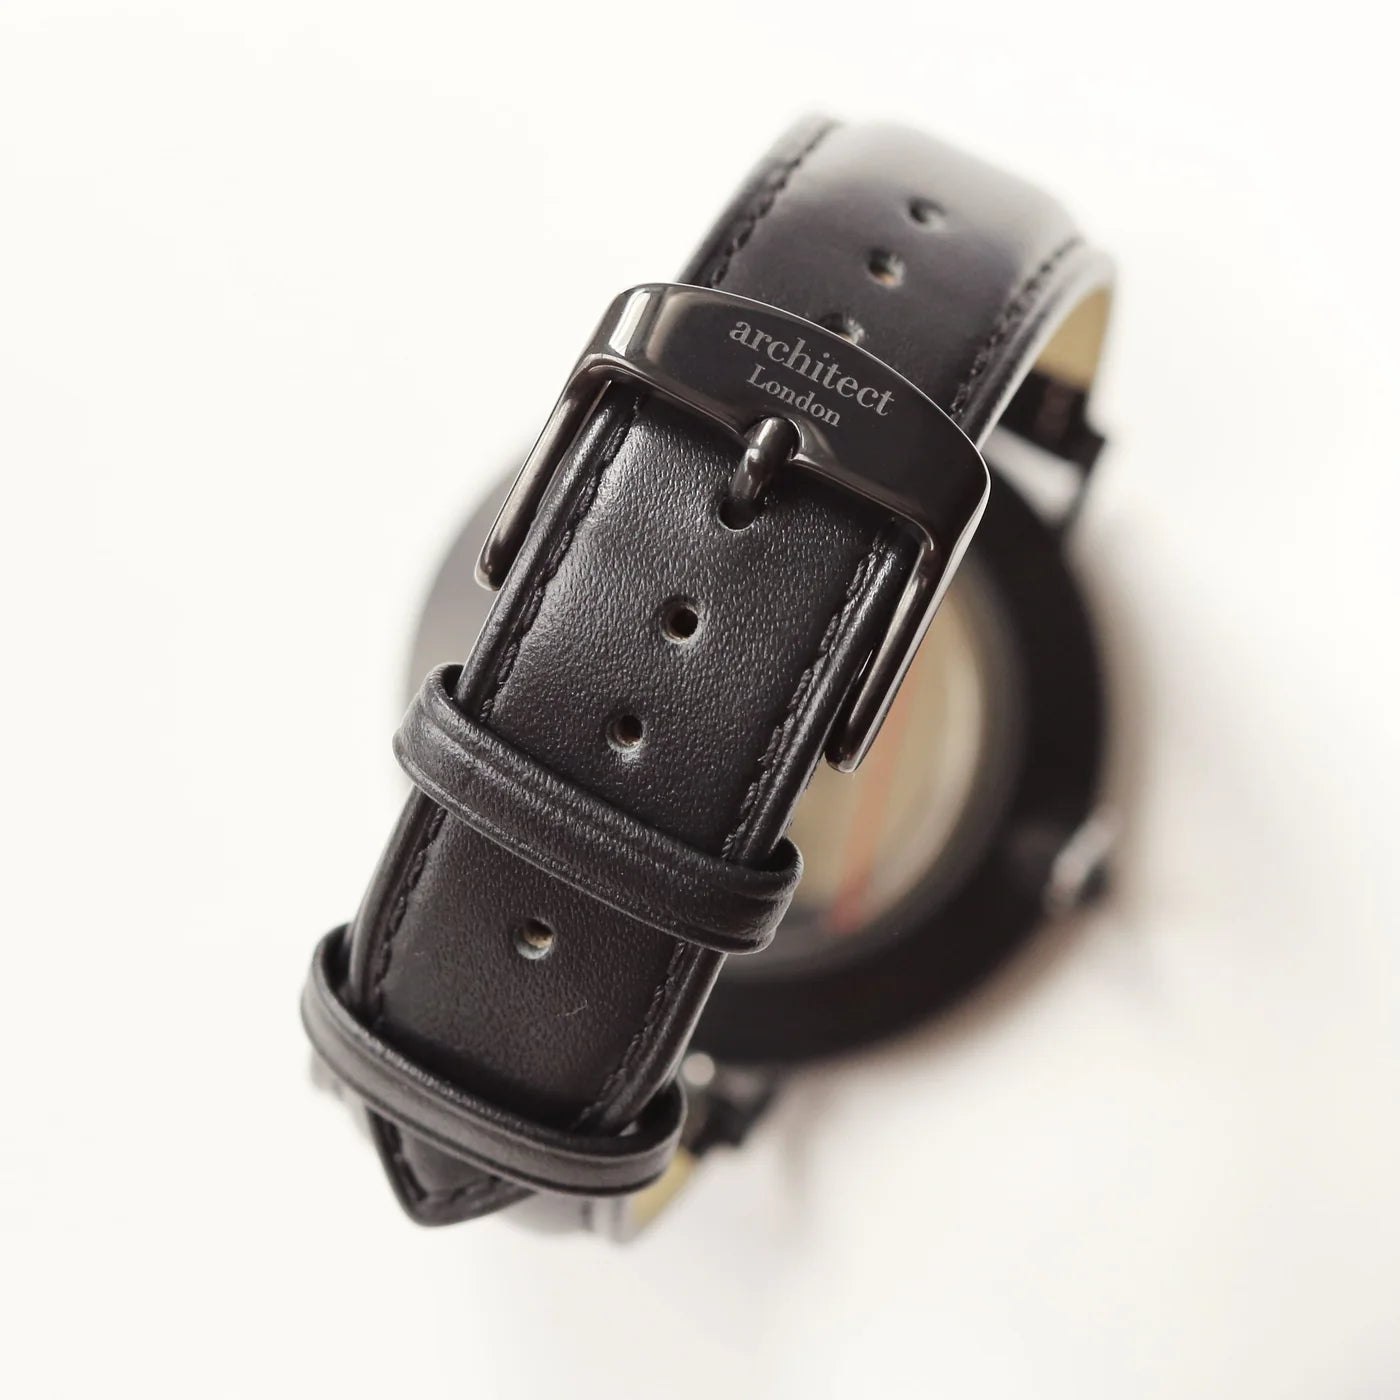 Image of a men's black Architect watch with a black face and leather strap. The back of the watch can be engraved with your own handwritten message or drawing.